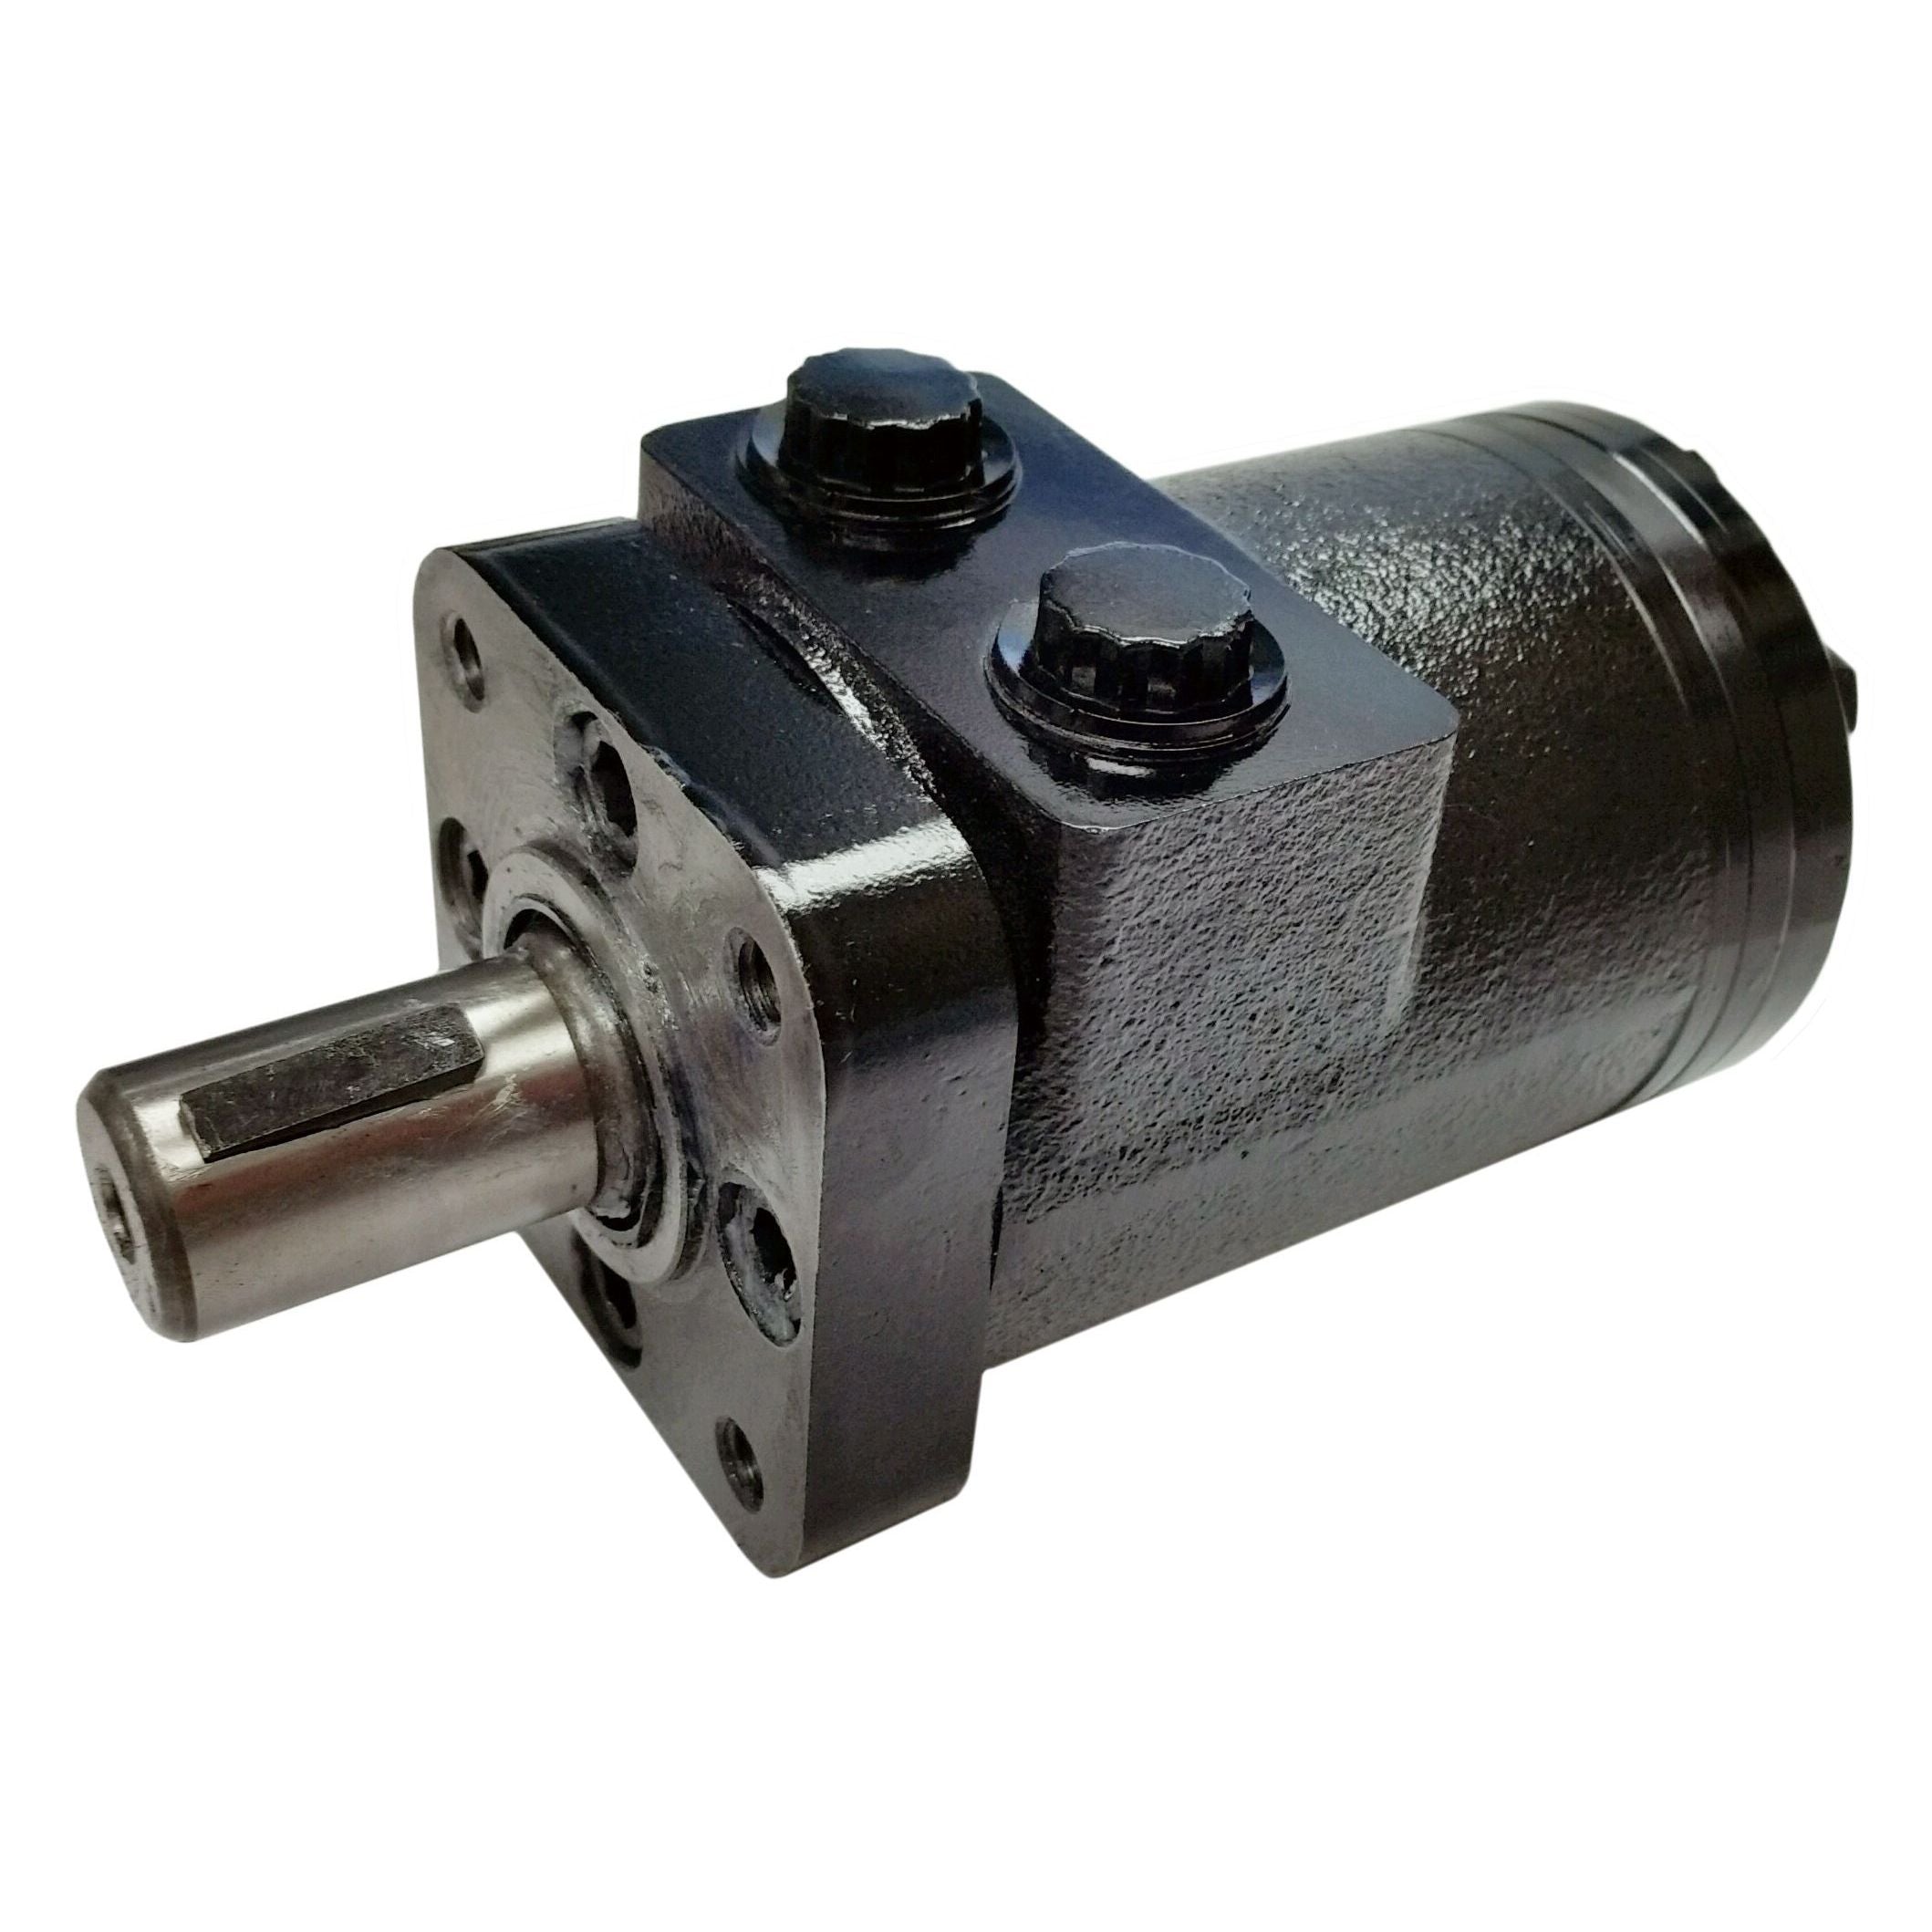 BMPH-400-H4-S-F : Dynamic LSHT Motor, 390cc, 155RPM, 3186in-lb, 1450psi Differential, 15.85GPM, SAE A 4-Bolt Mount, 6-Tooth Shaft, Side Ported, Manifold